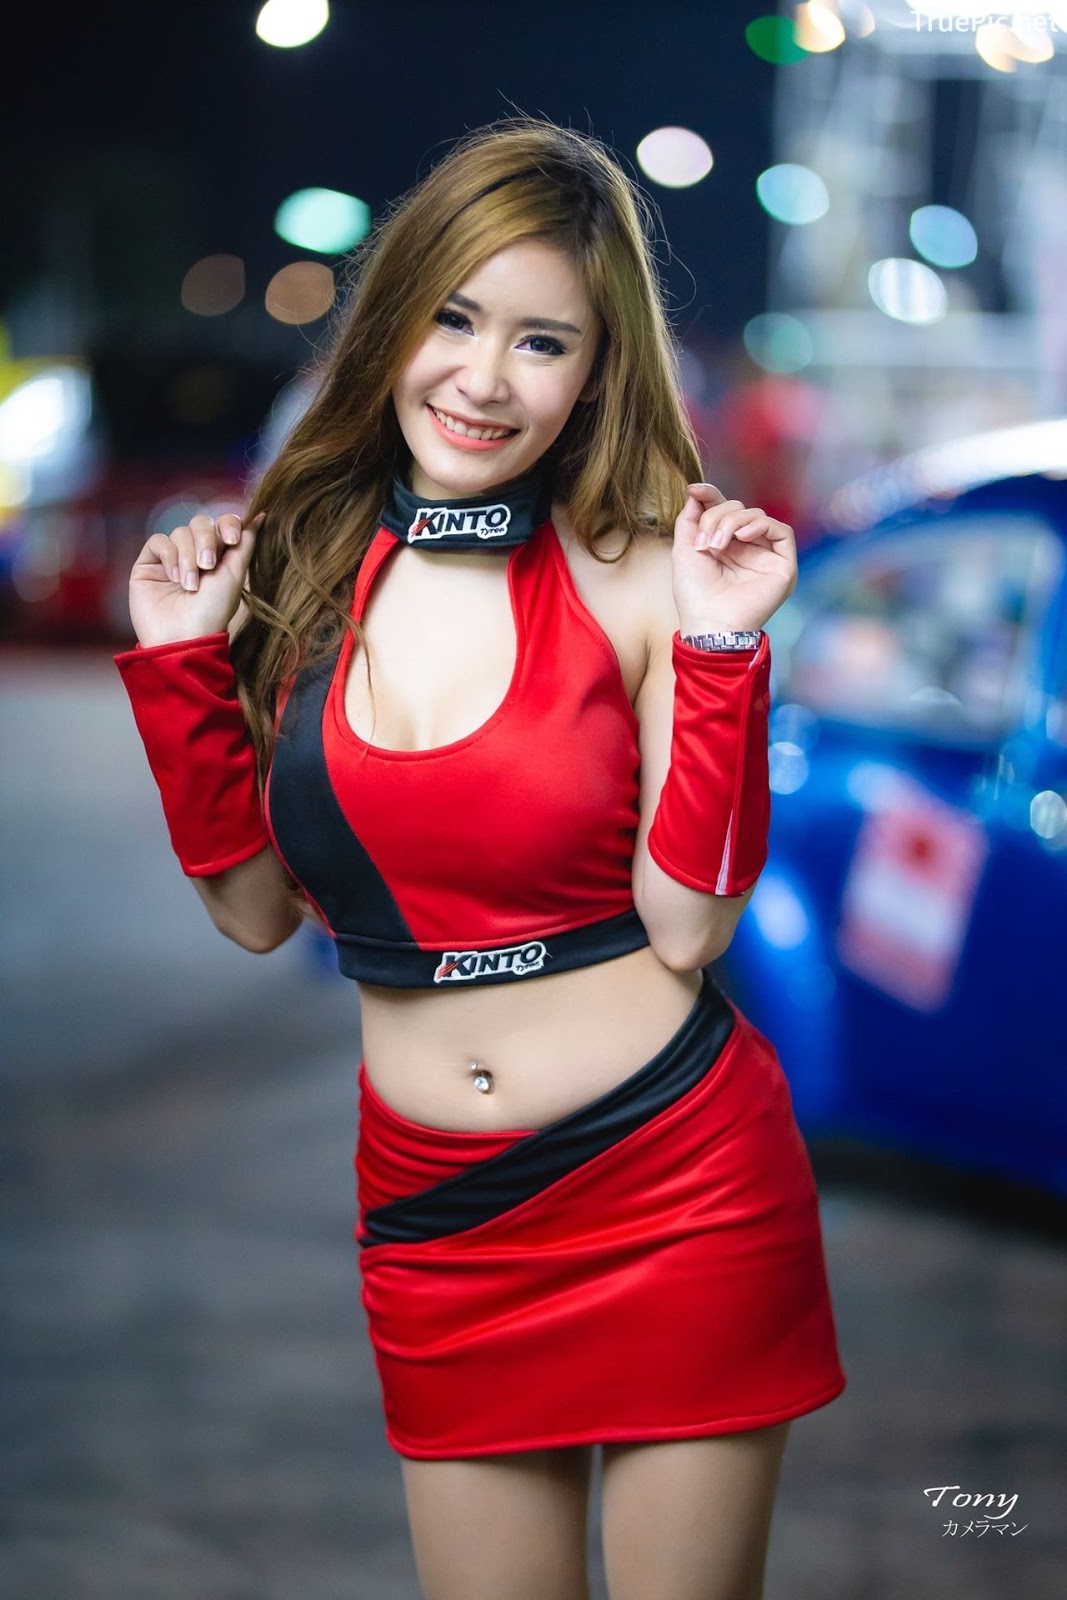 Image-Thailand-Hot-Model-Thai-Racing-Girl-At-Pathum-Thani-Speedway-TruePic.net- Picture-39